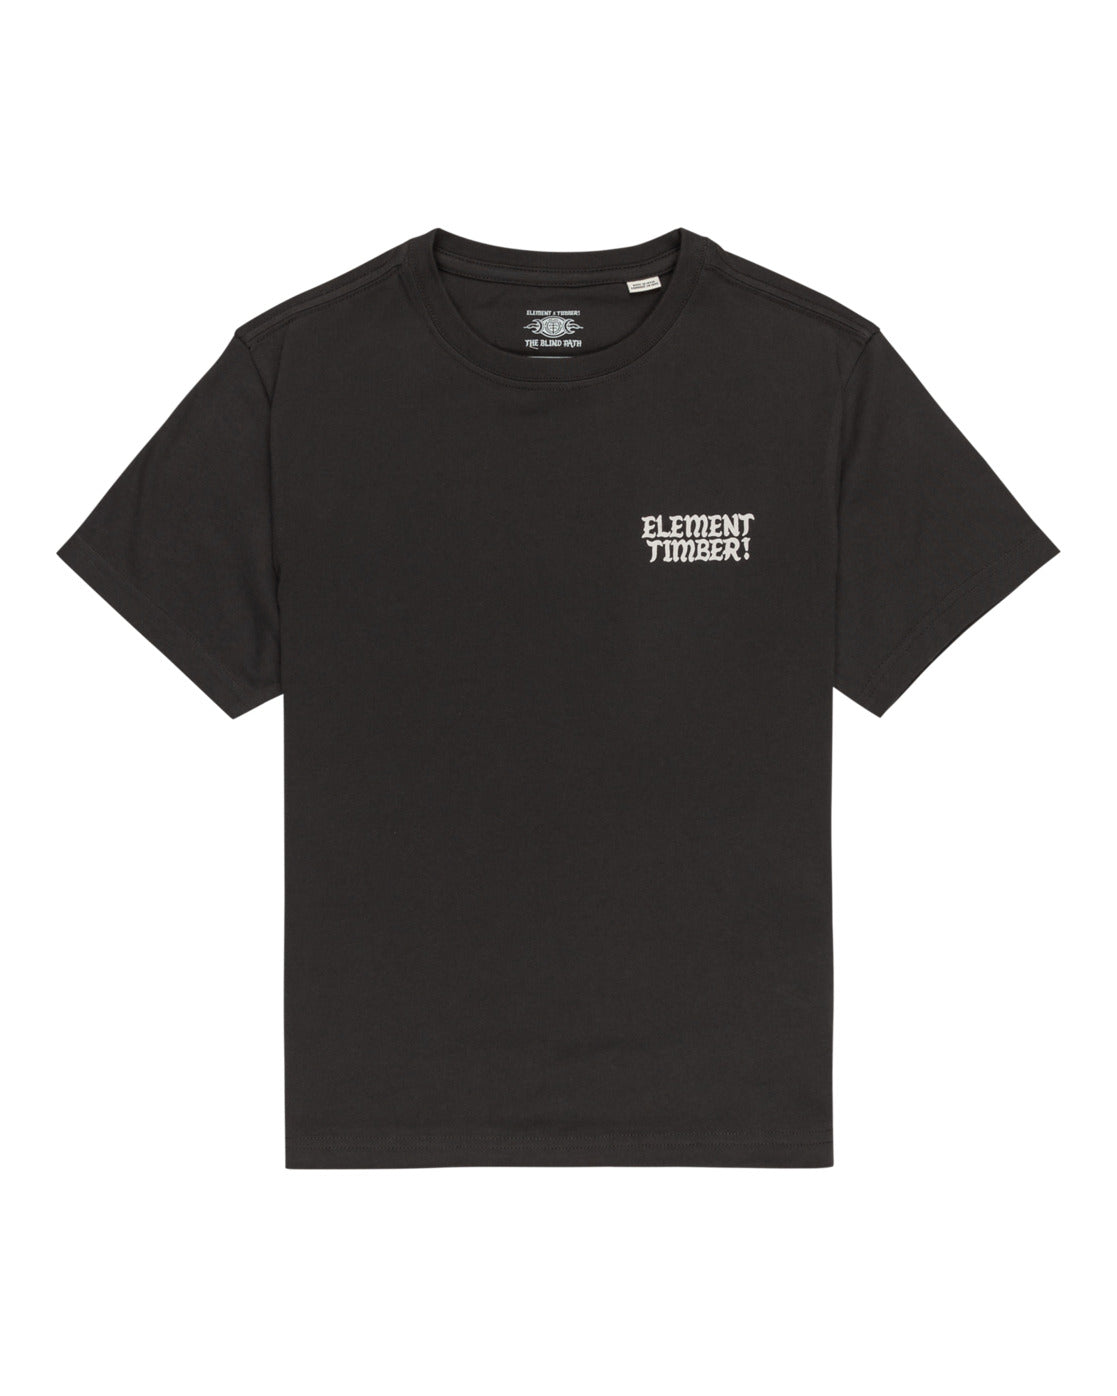 ELEMENT - TIMBER JESTER SS YOUTH TEE - OFF BLACK